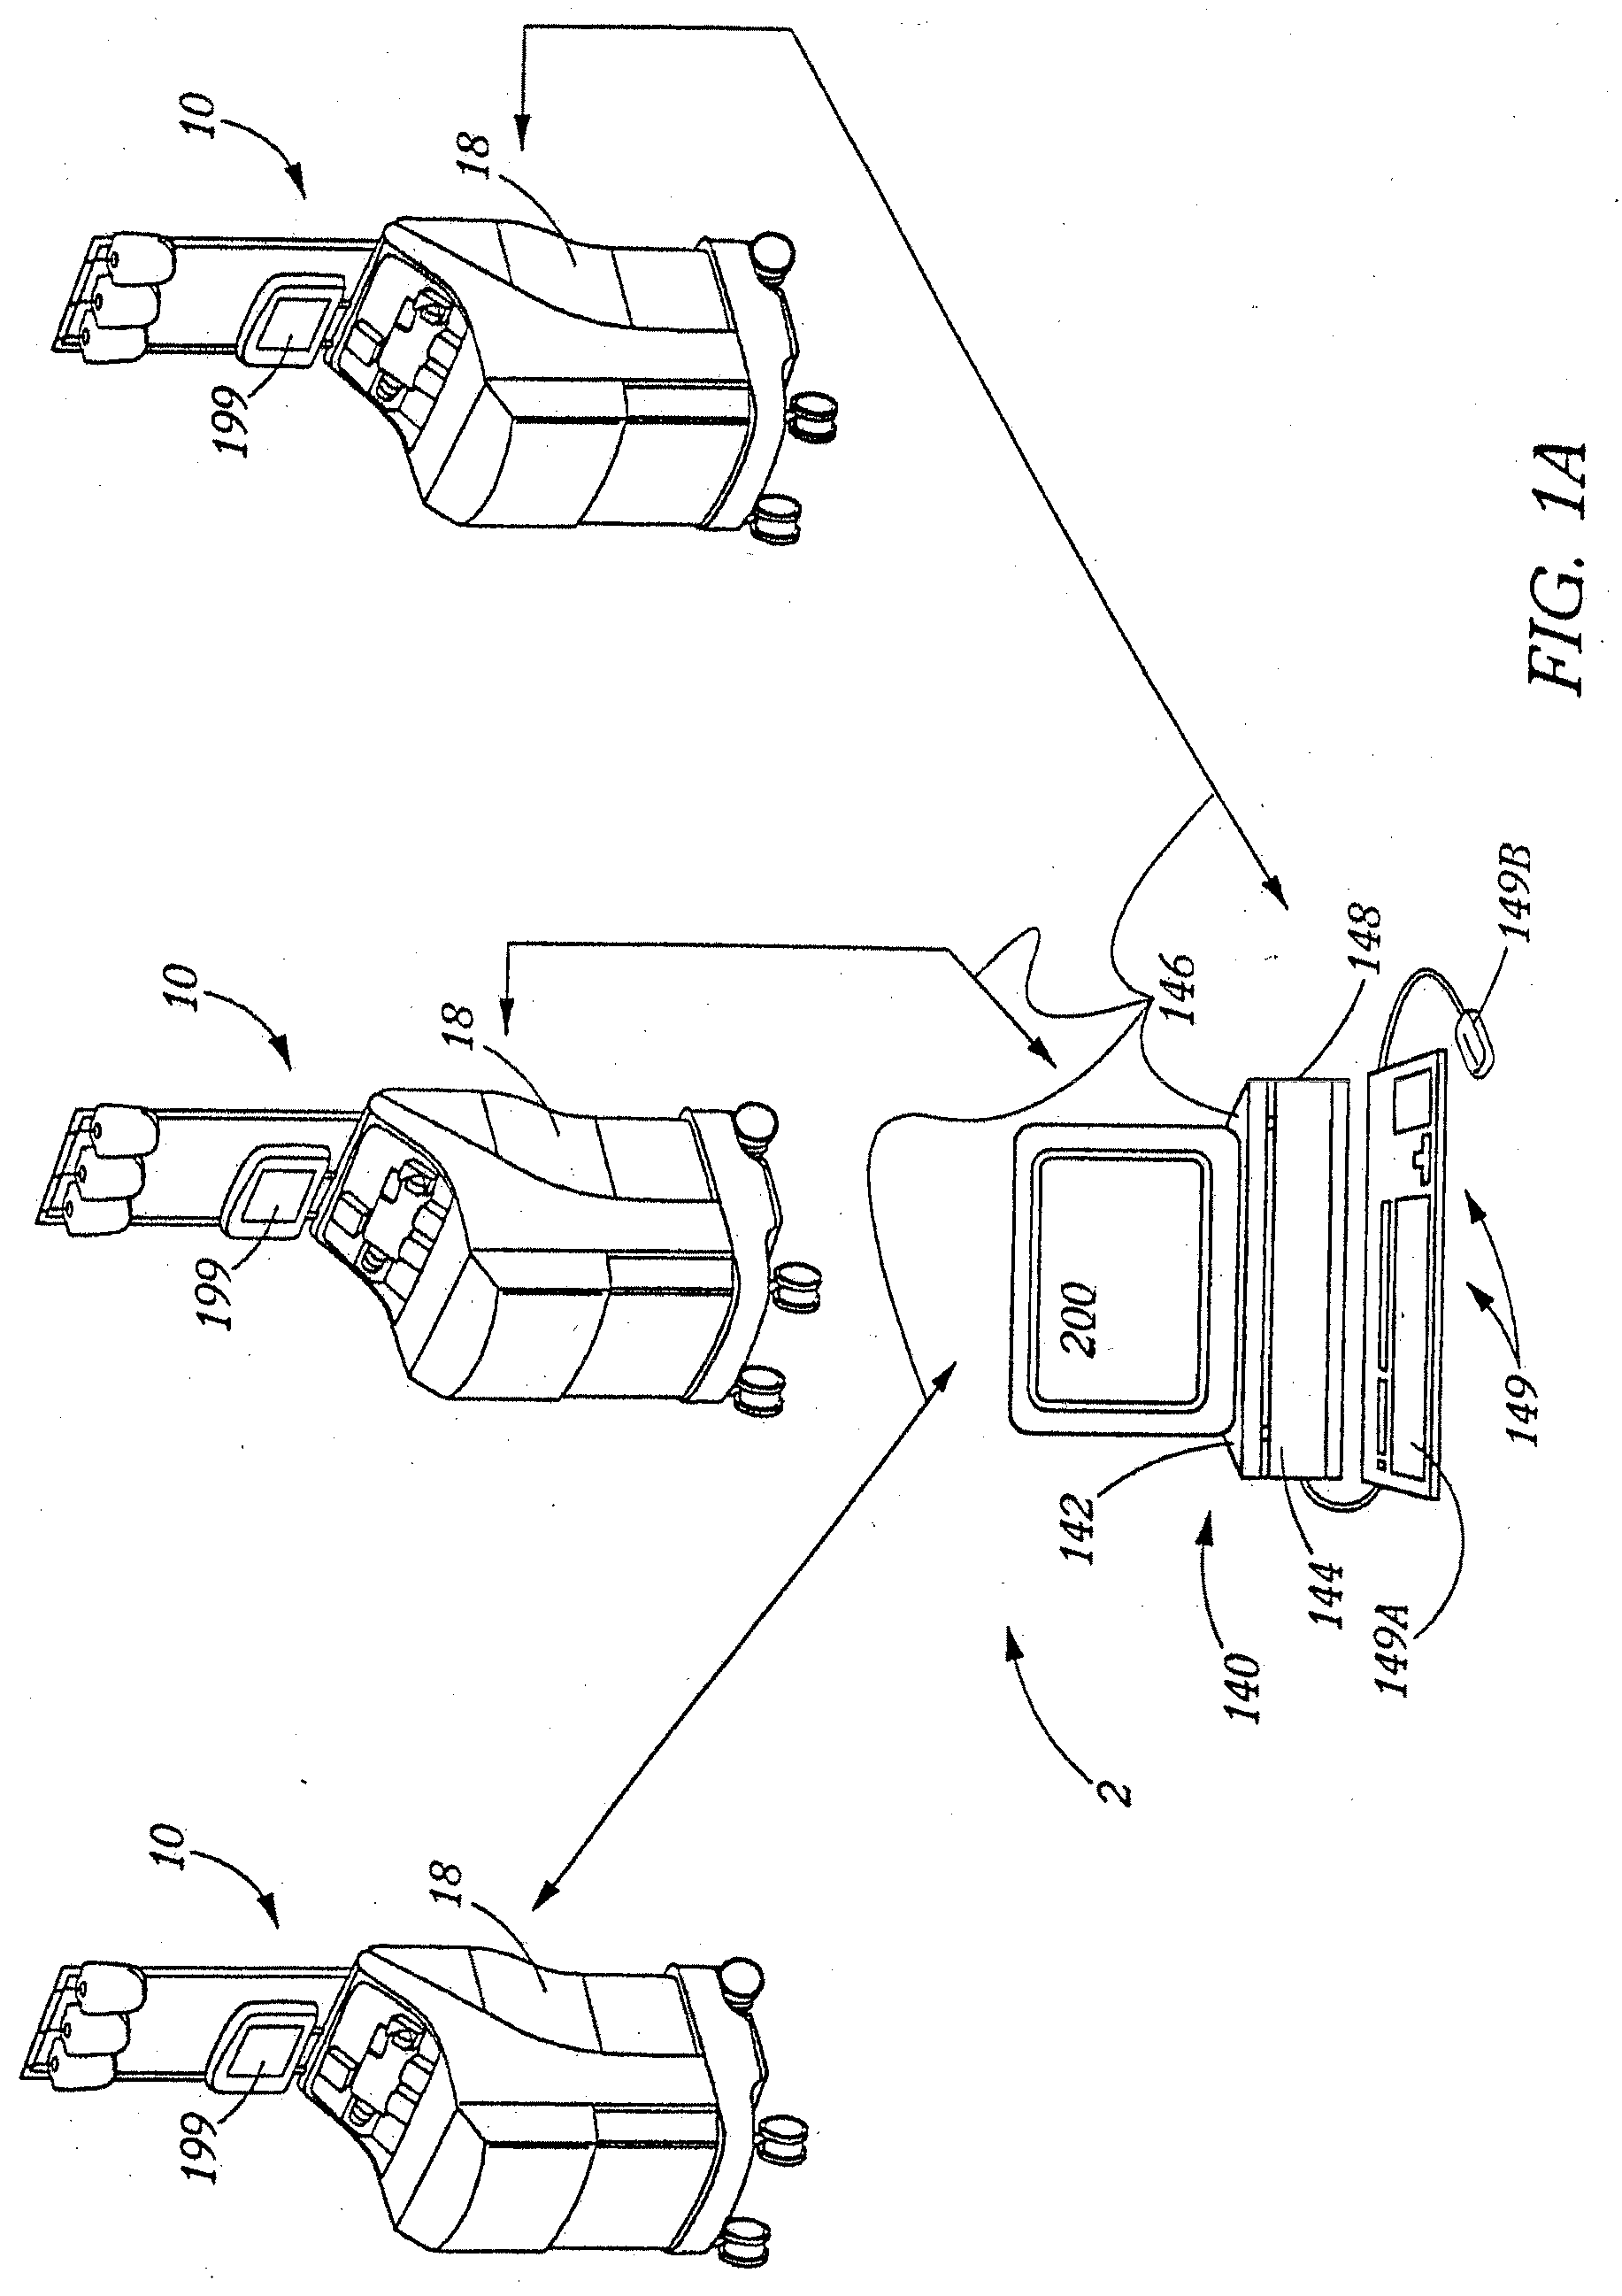 Extracorporeal blood processing information management system